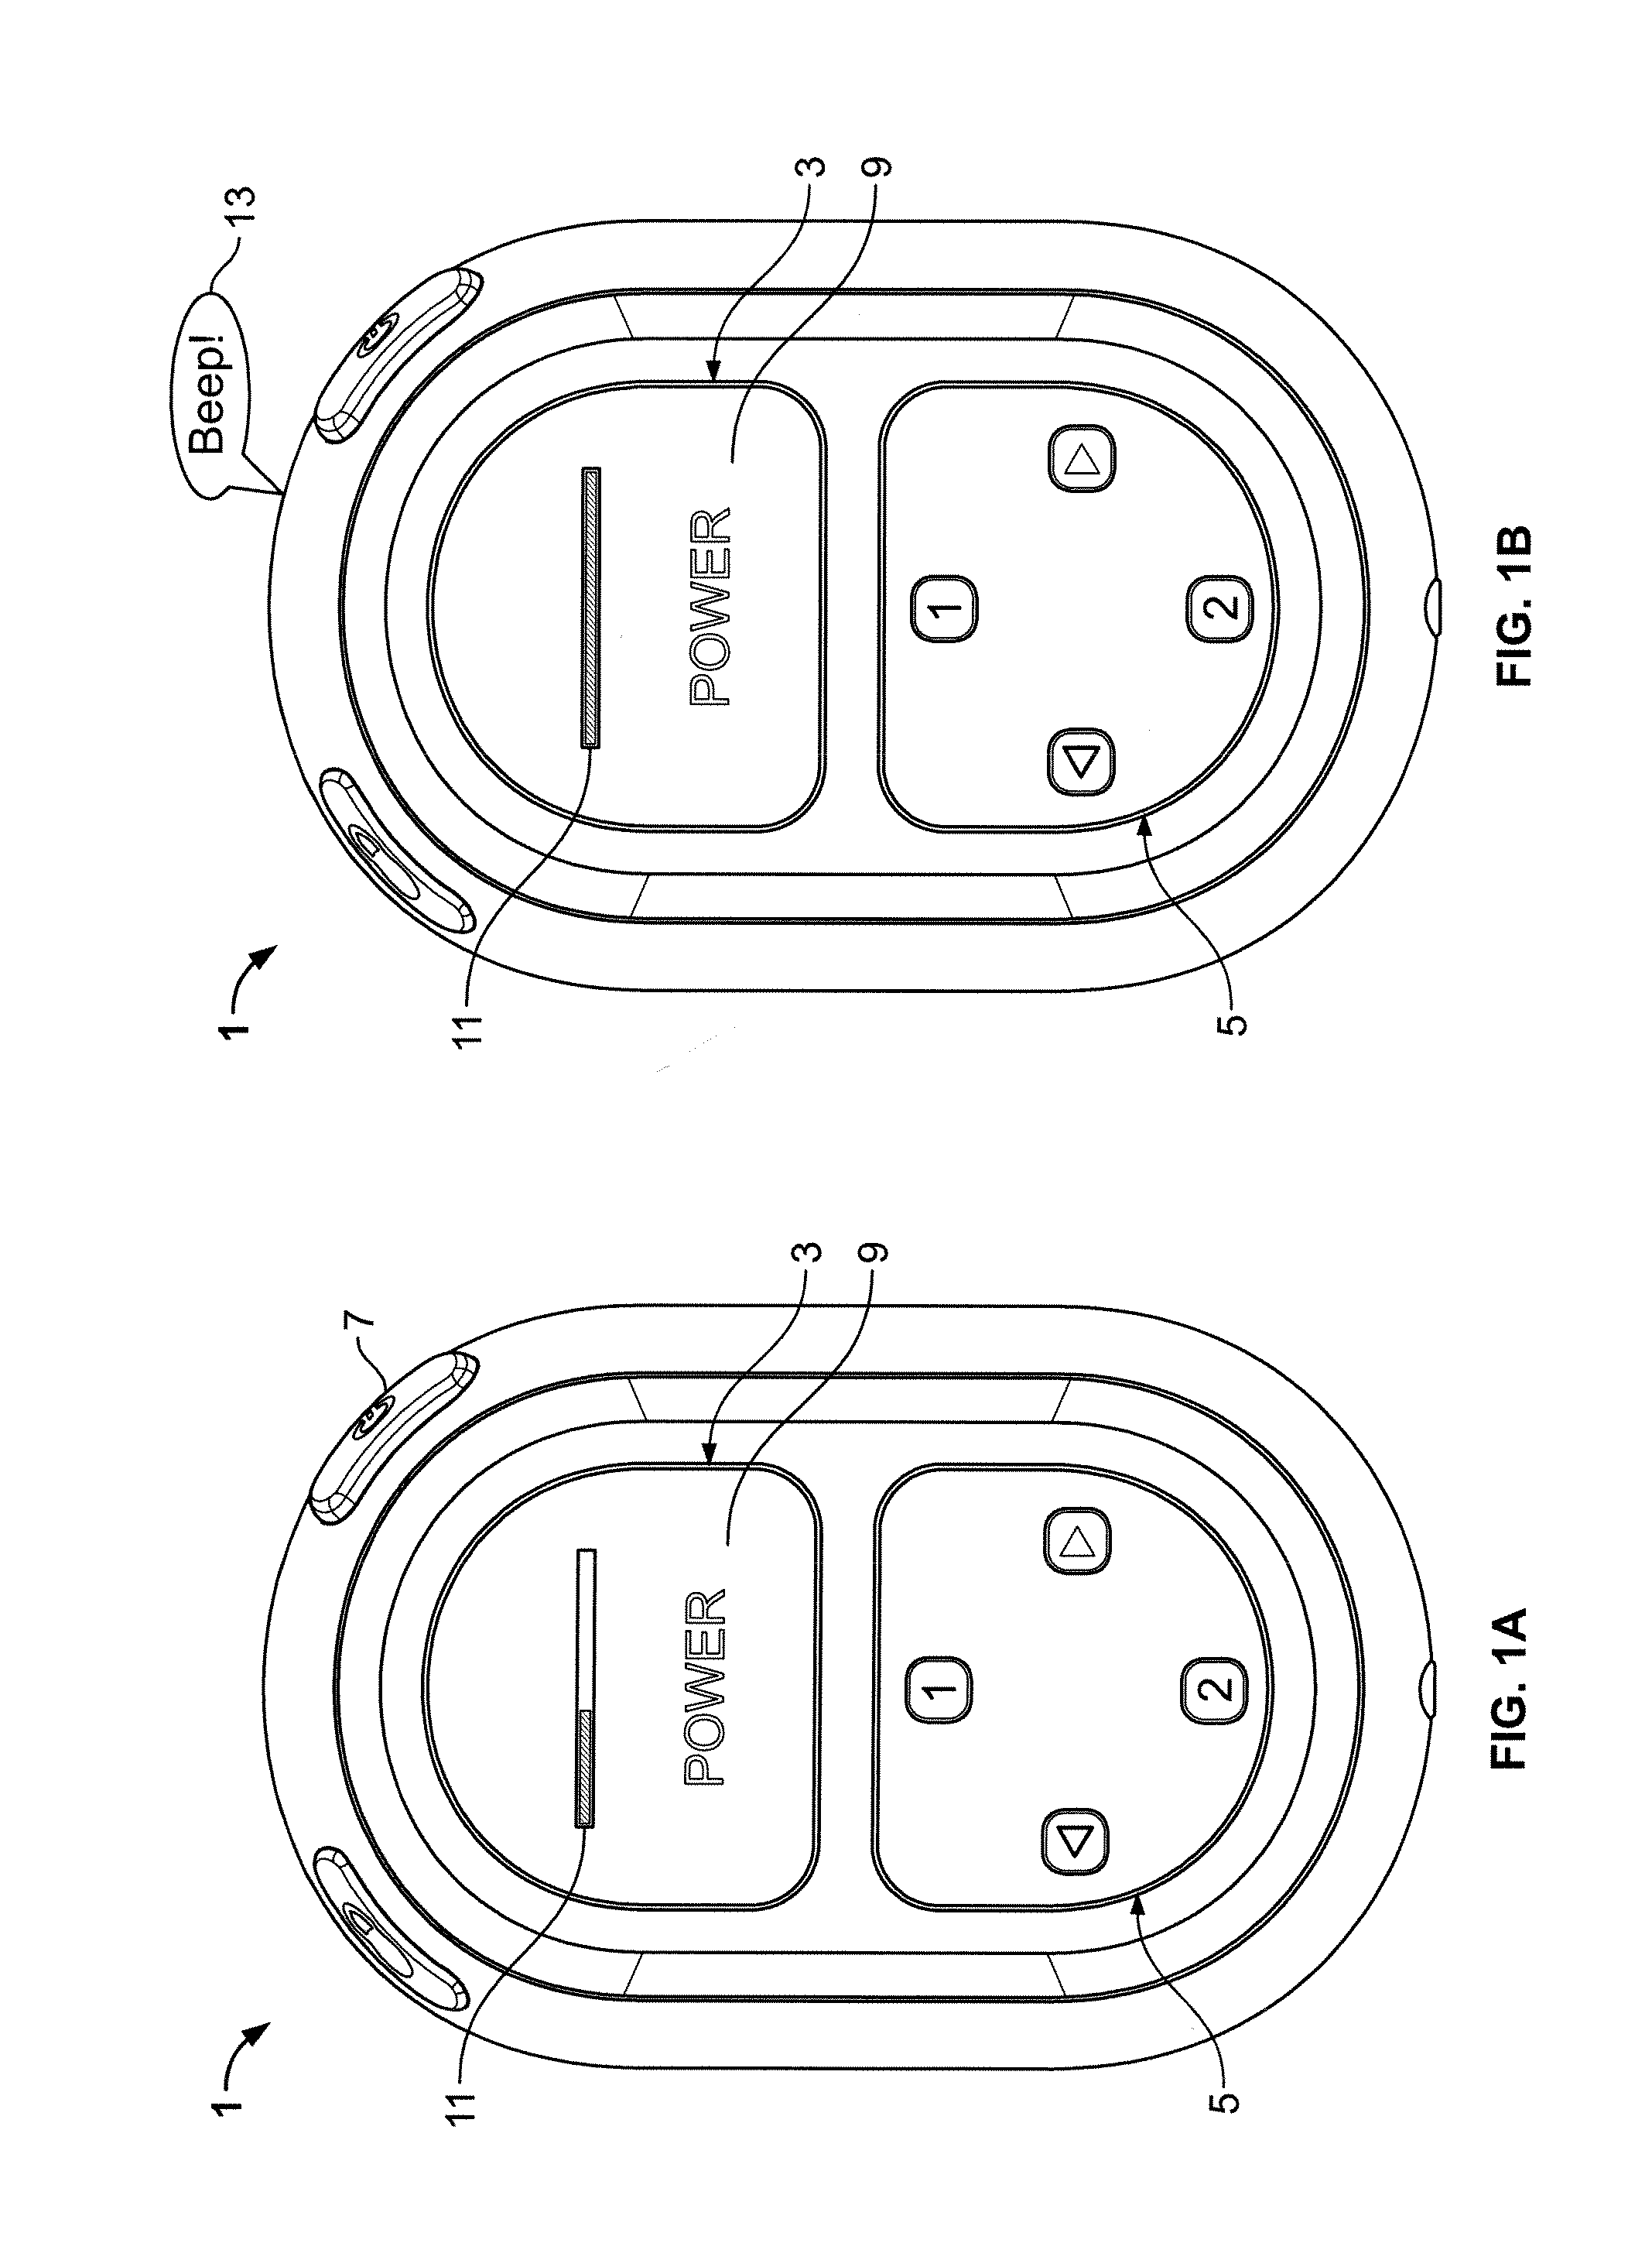 Method and system for button press and hold feedback